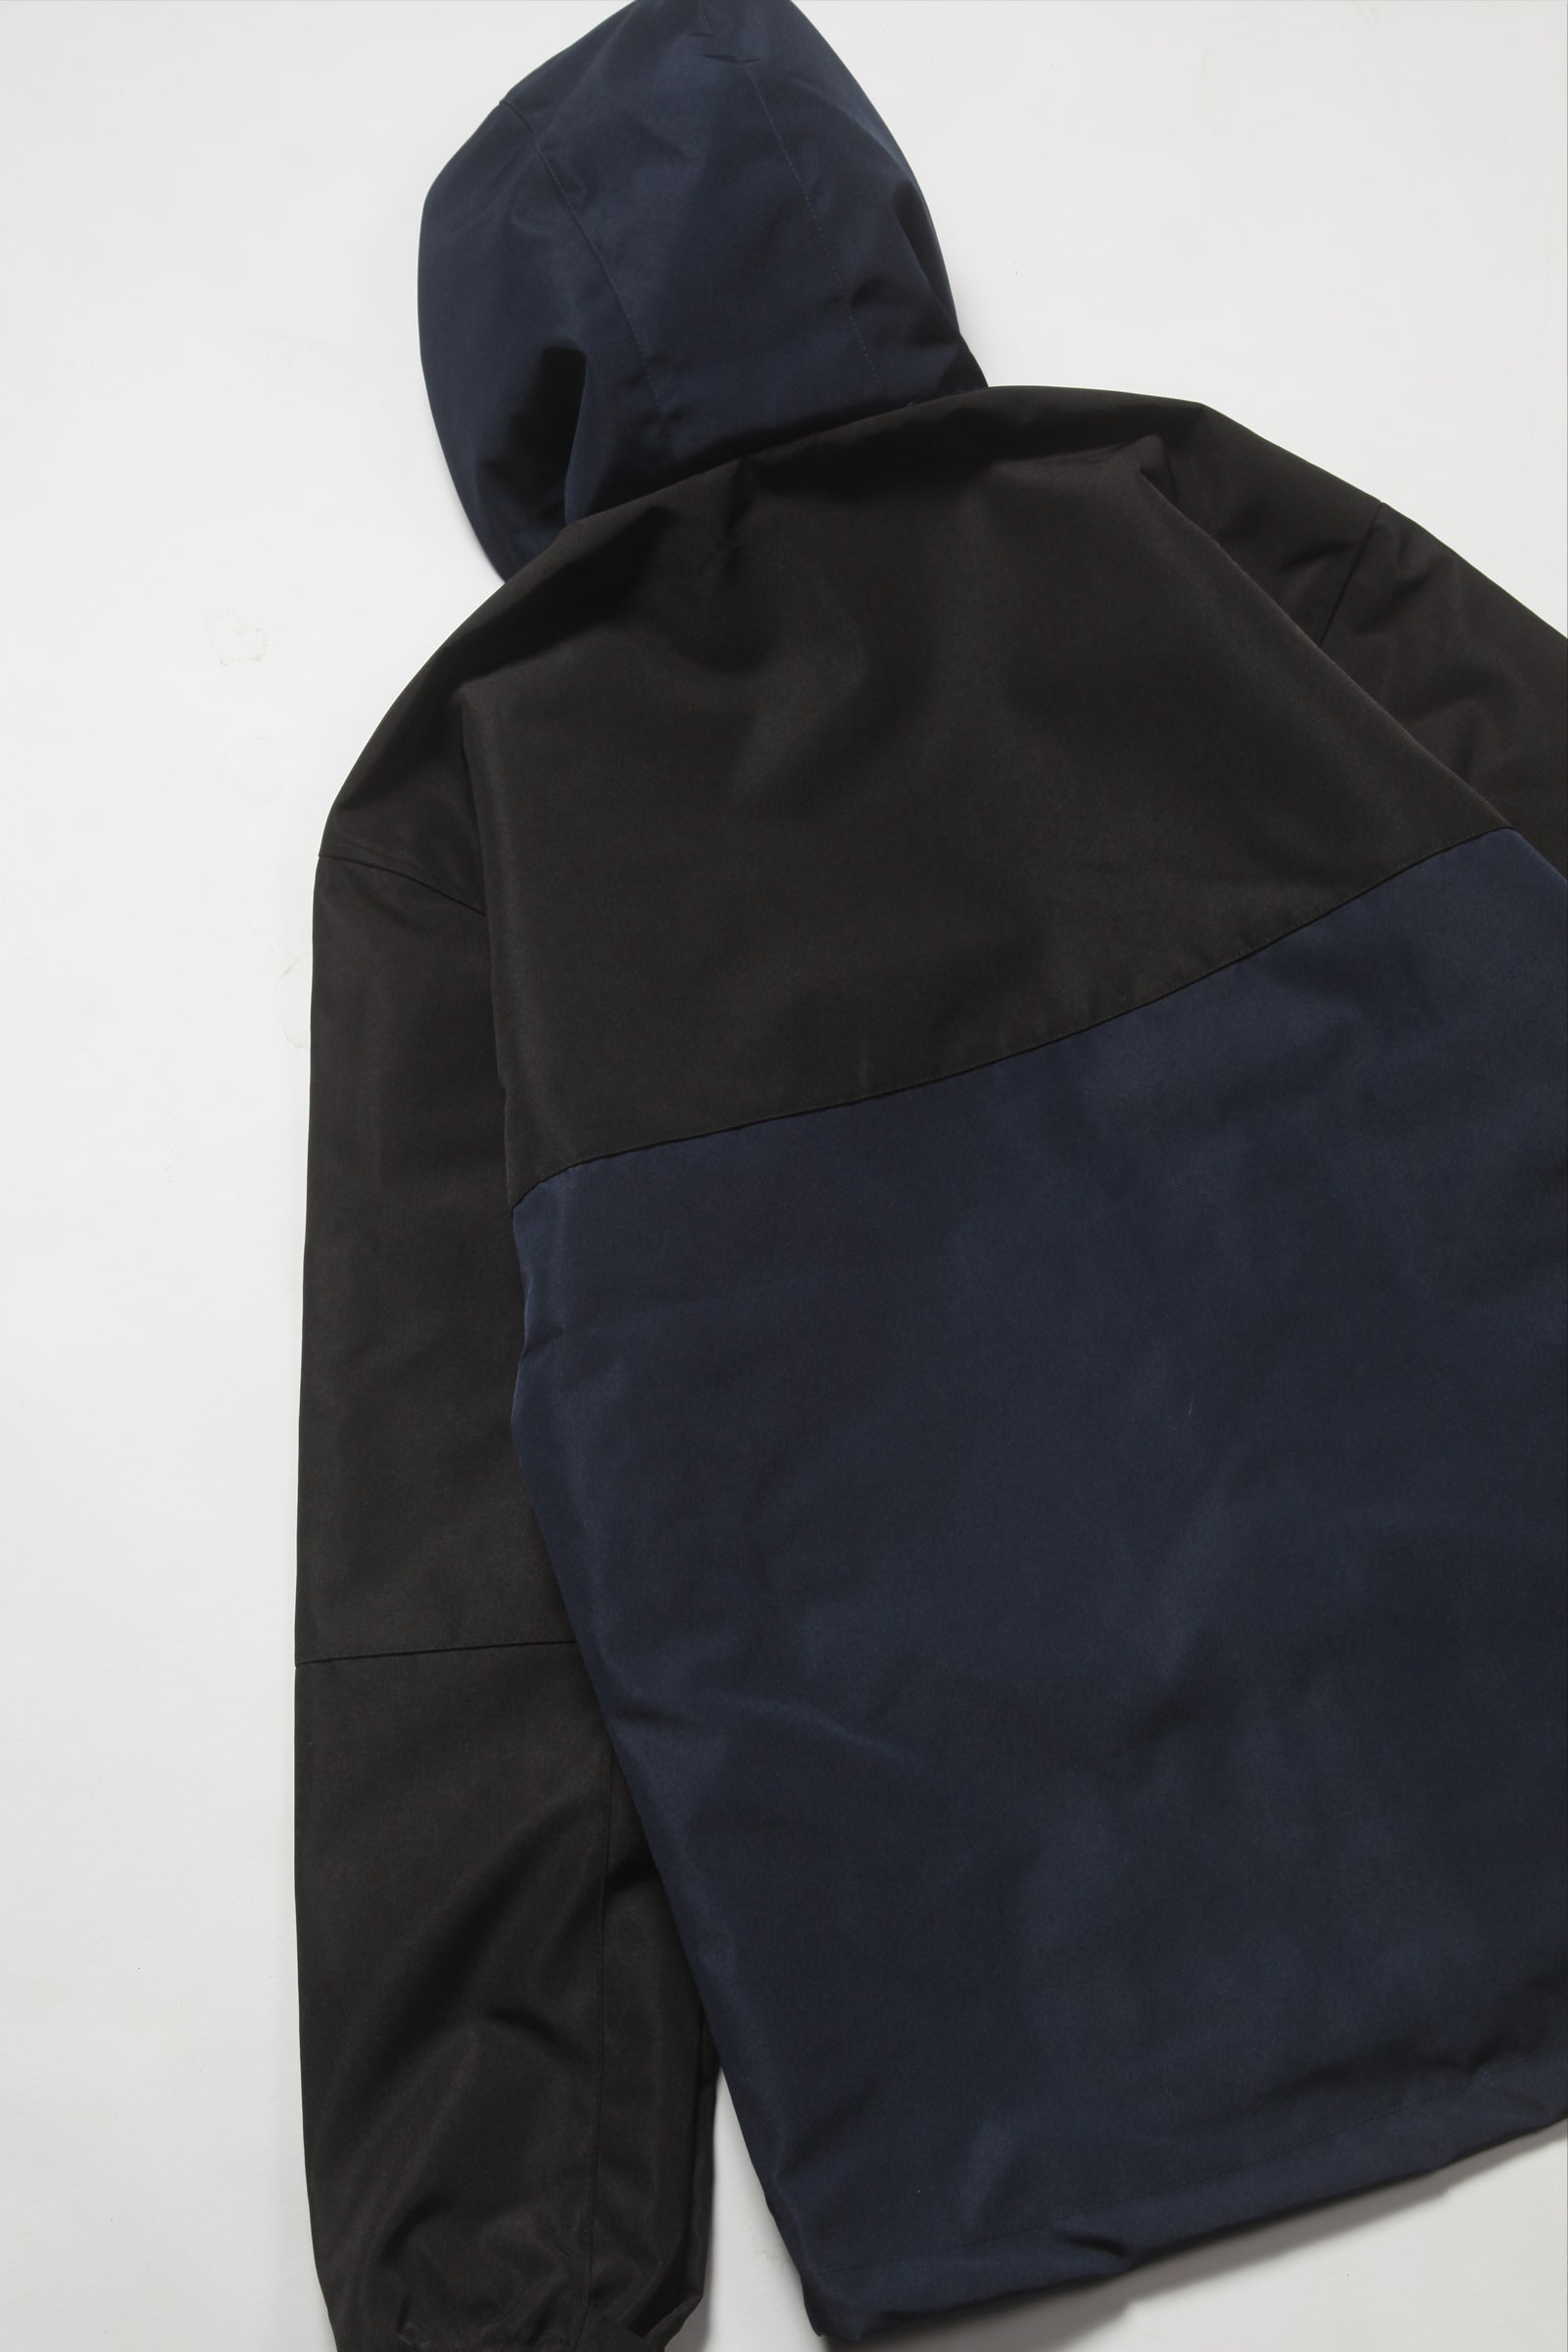 United Athle - 7489 Two Tone Shell Parka - Navy/Black